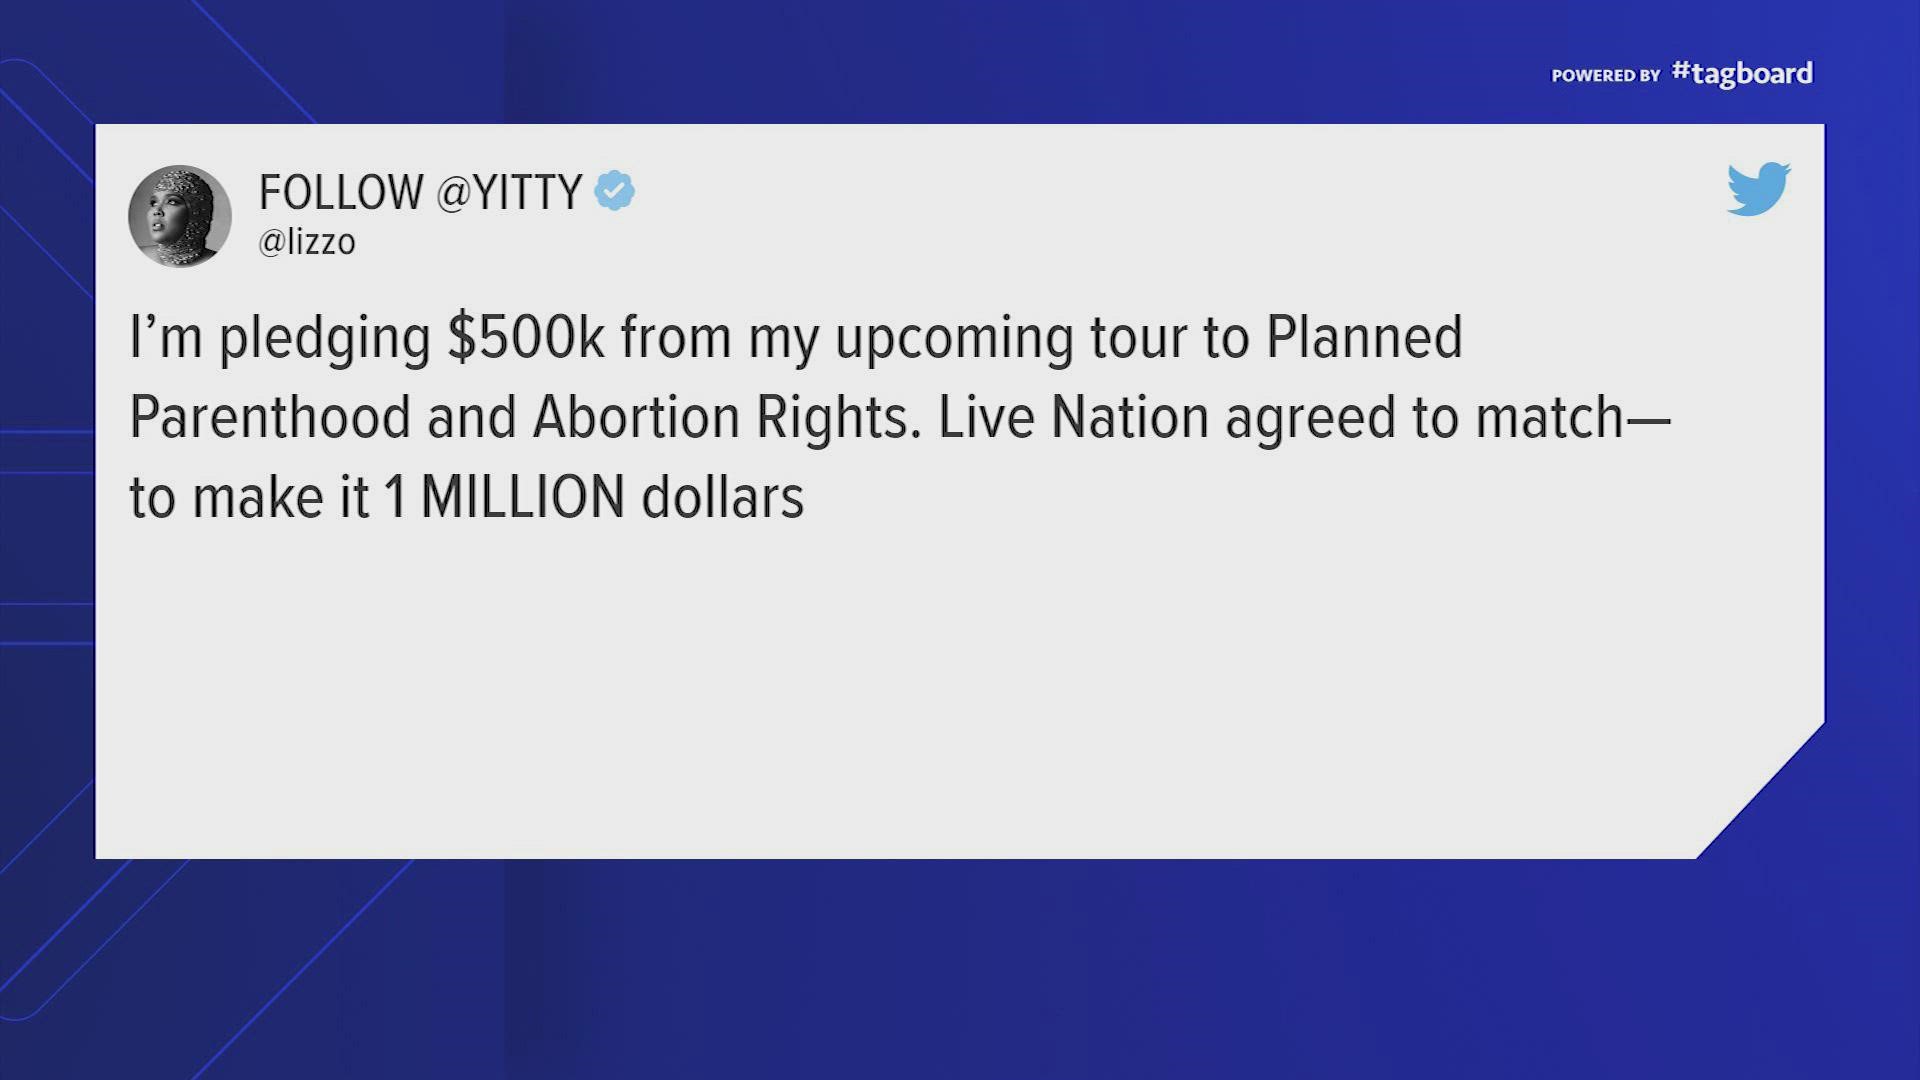 Houston superstar Lizzo is pledging $500,000 from her upcoming tour to Planned Parenthood and abortion rights, the singer announced on her Twitter Friday.